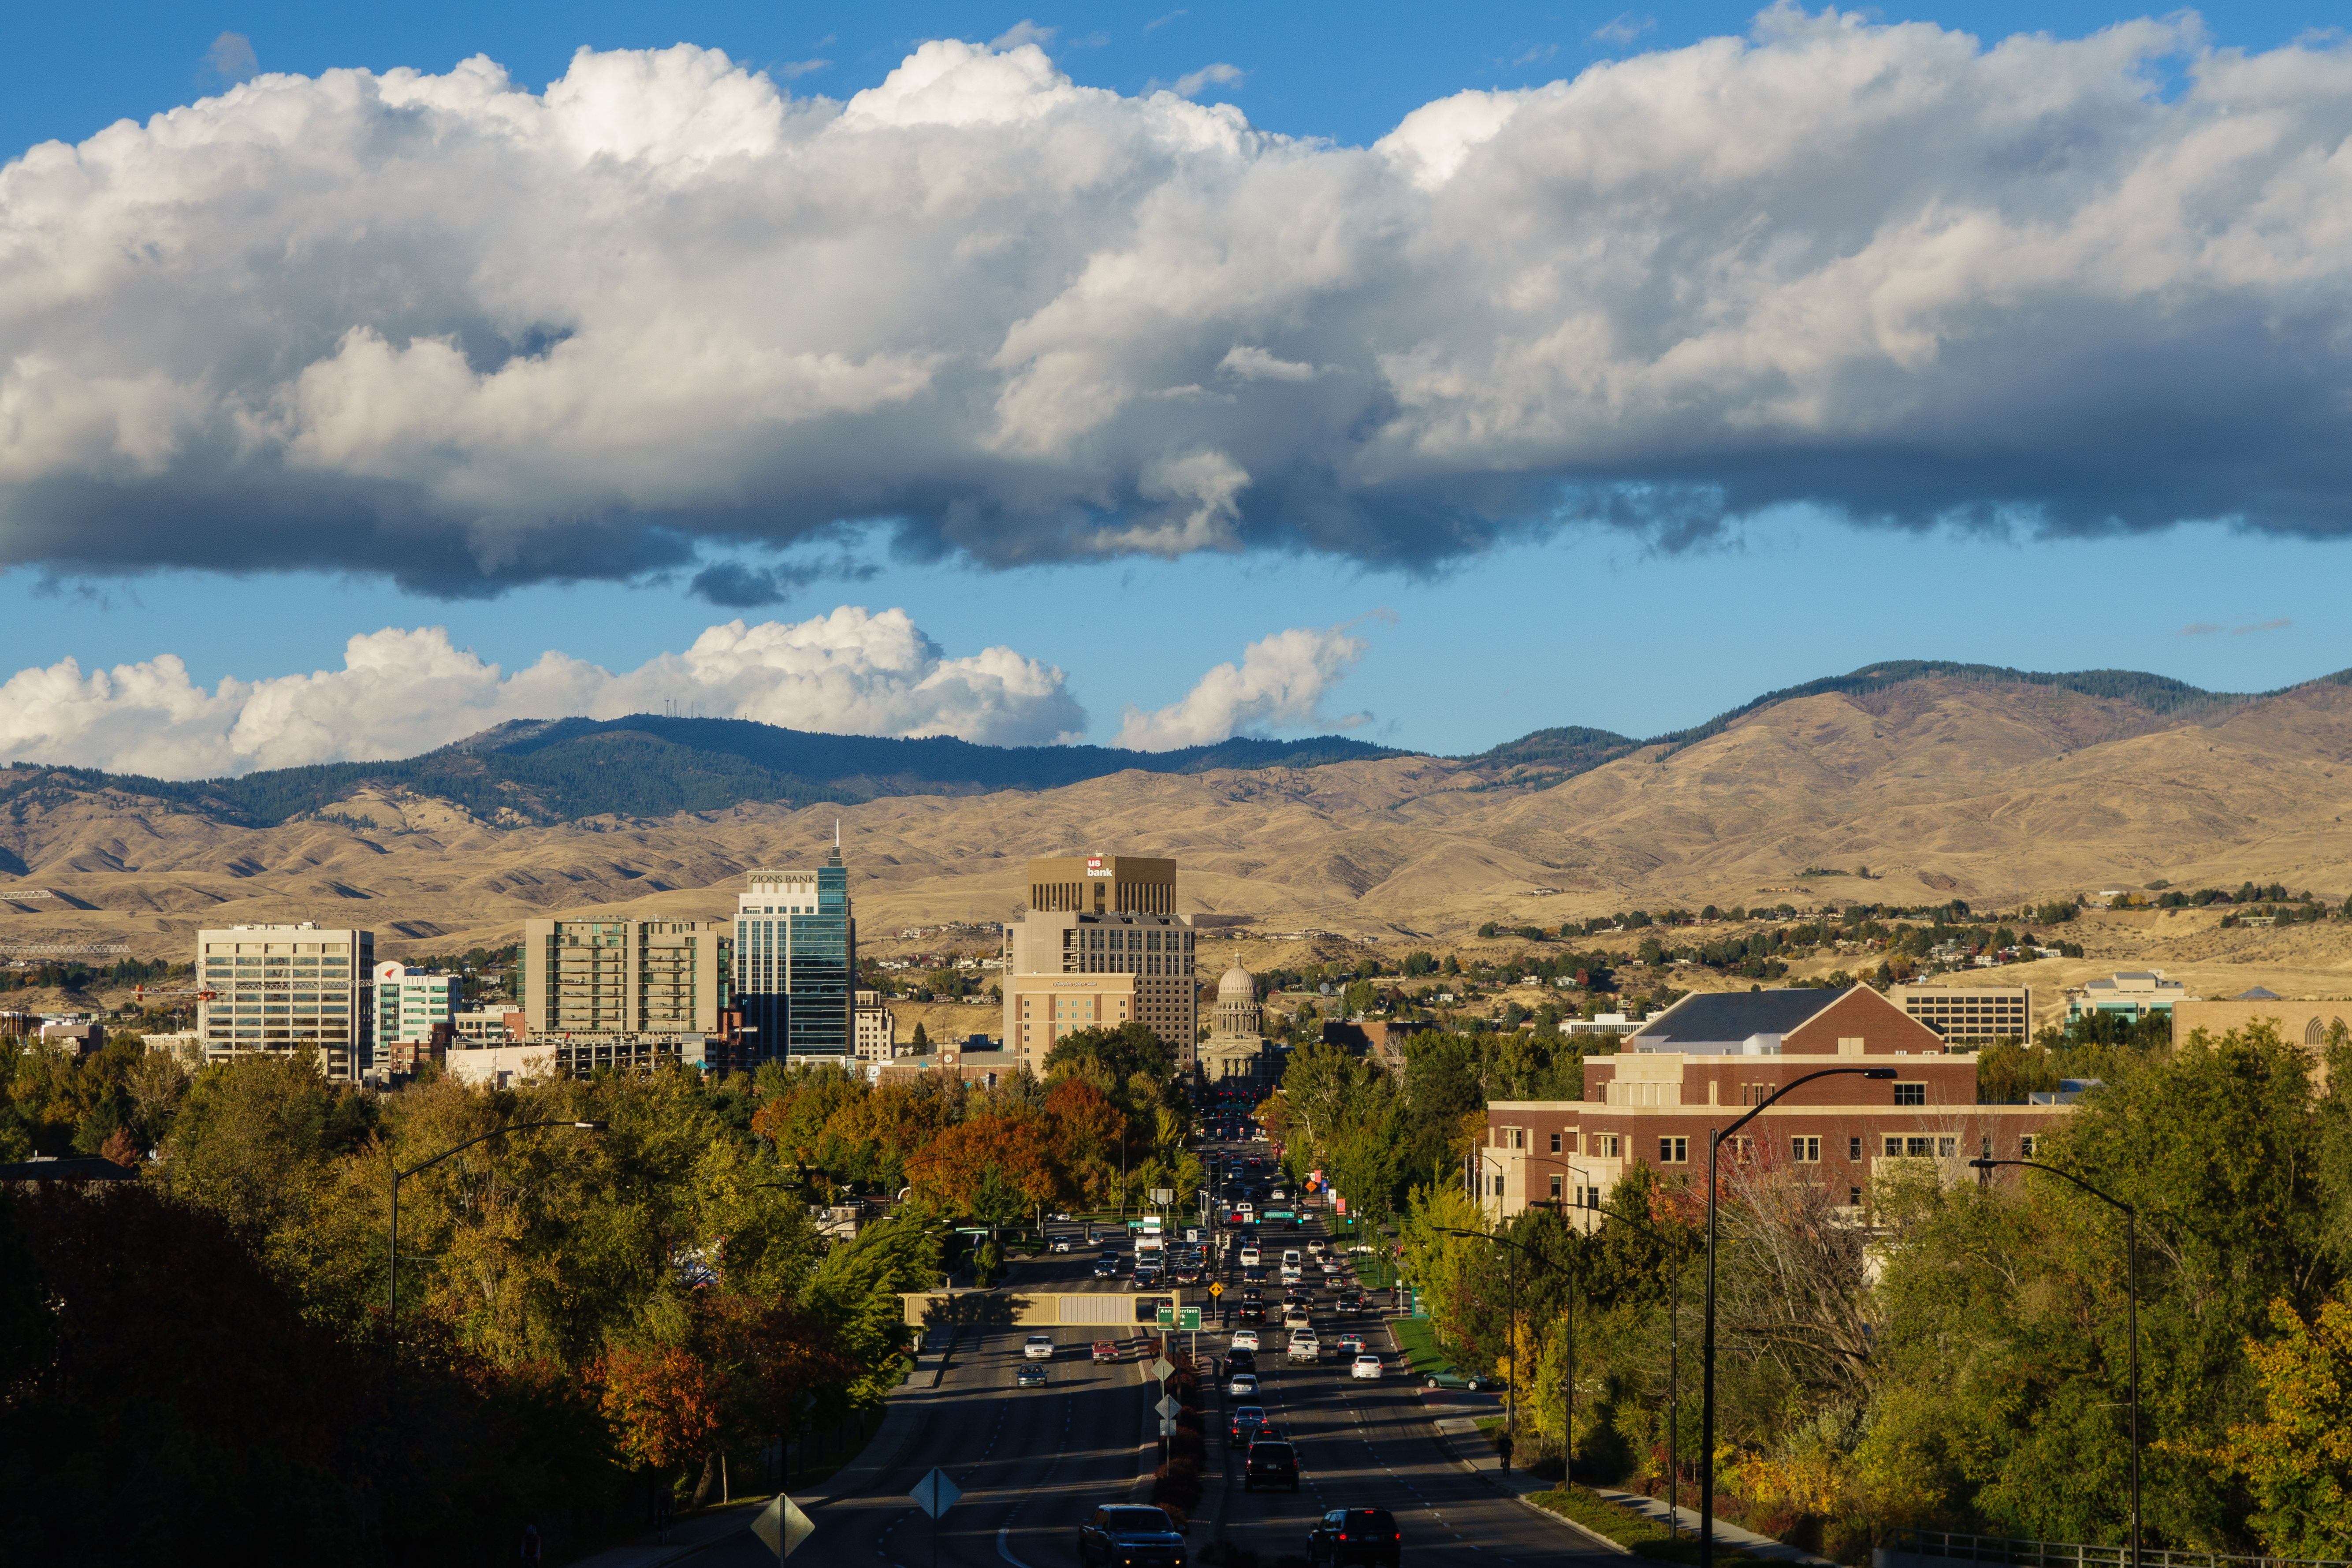 Downtown Boise, Idaho on a fall afternoon in October 2014 as seen from the Boise Depot. (Robby Milo | http://rmilo.com)